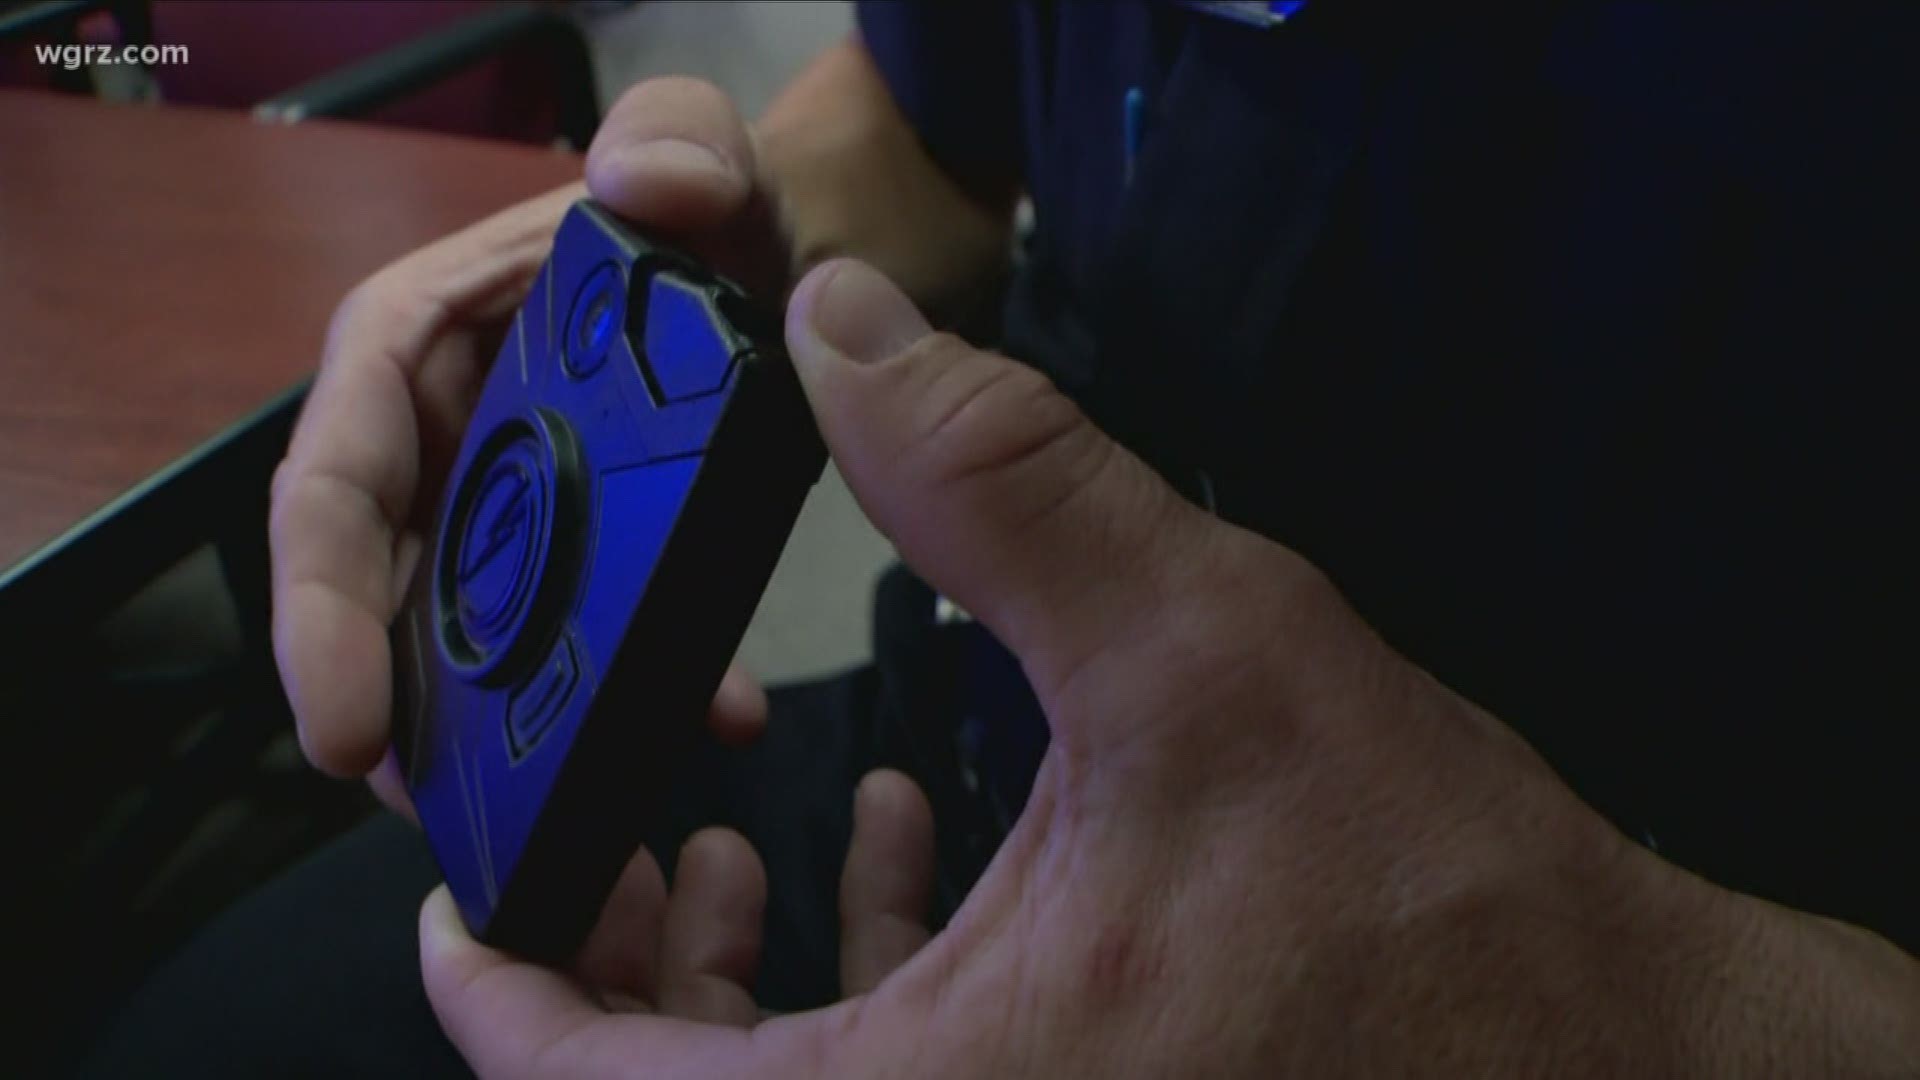 that troopers will start getting body cams soon under a pilot program.